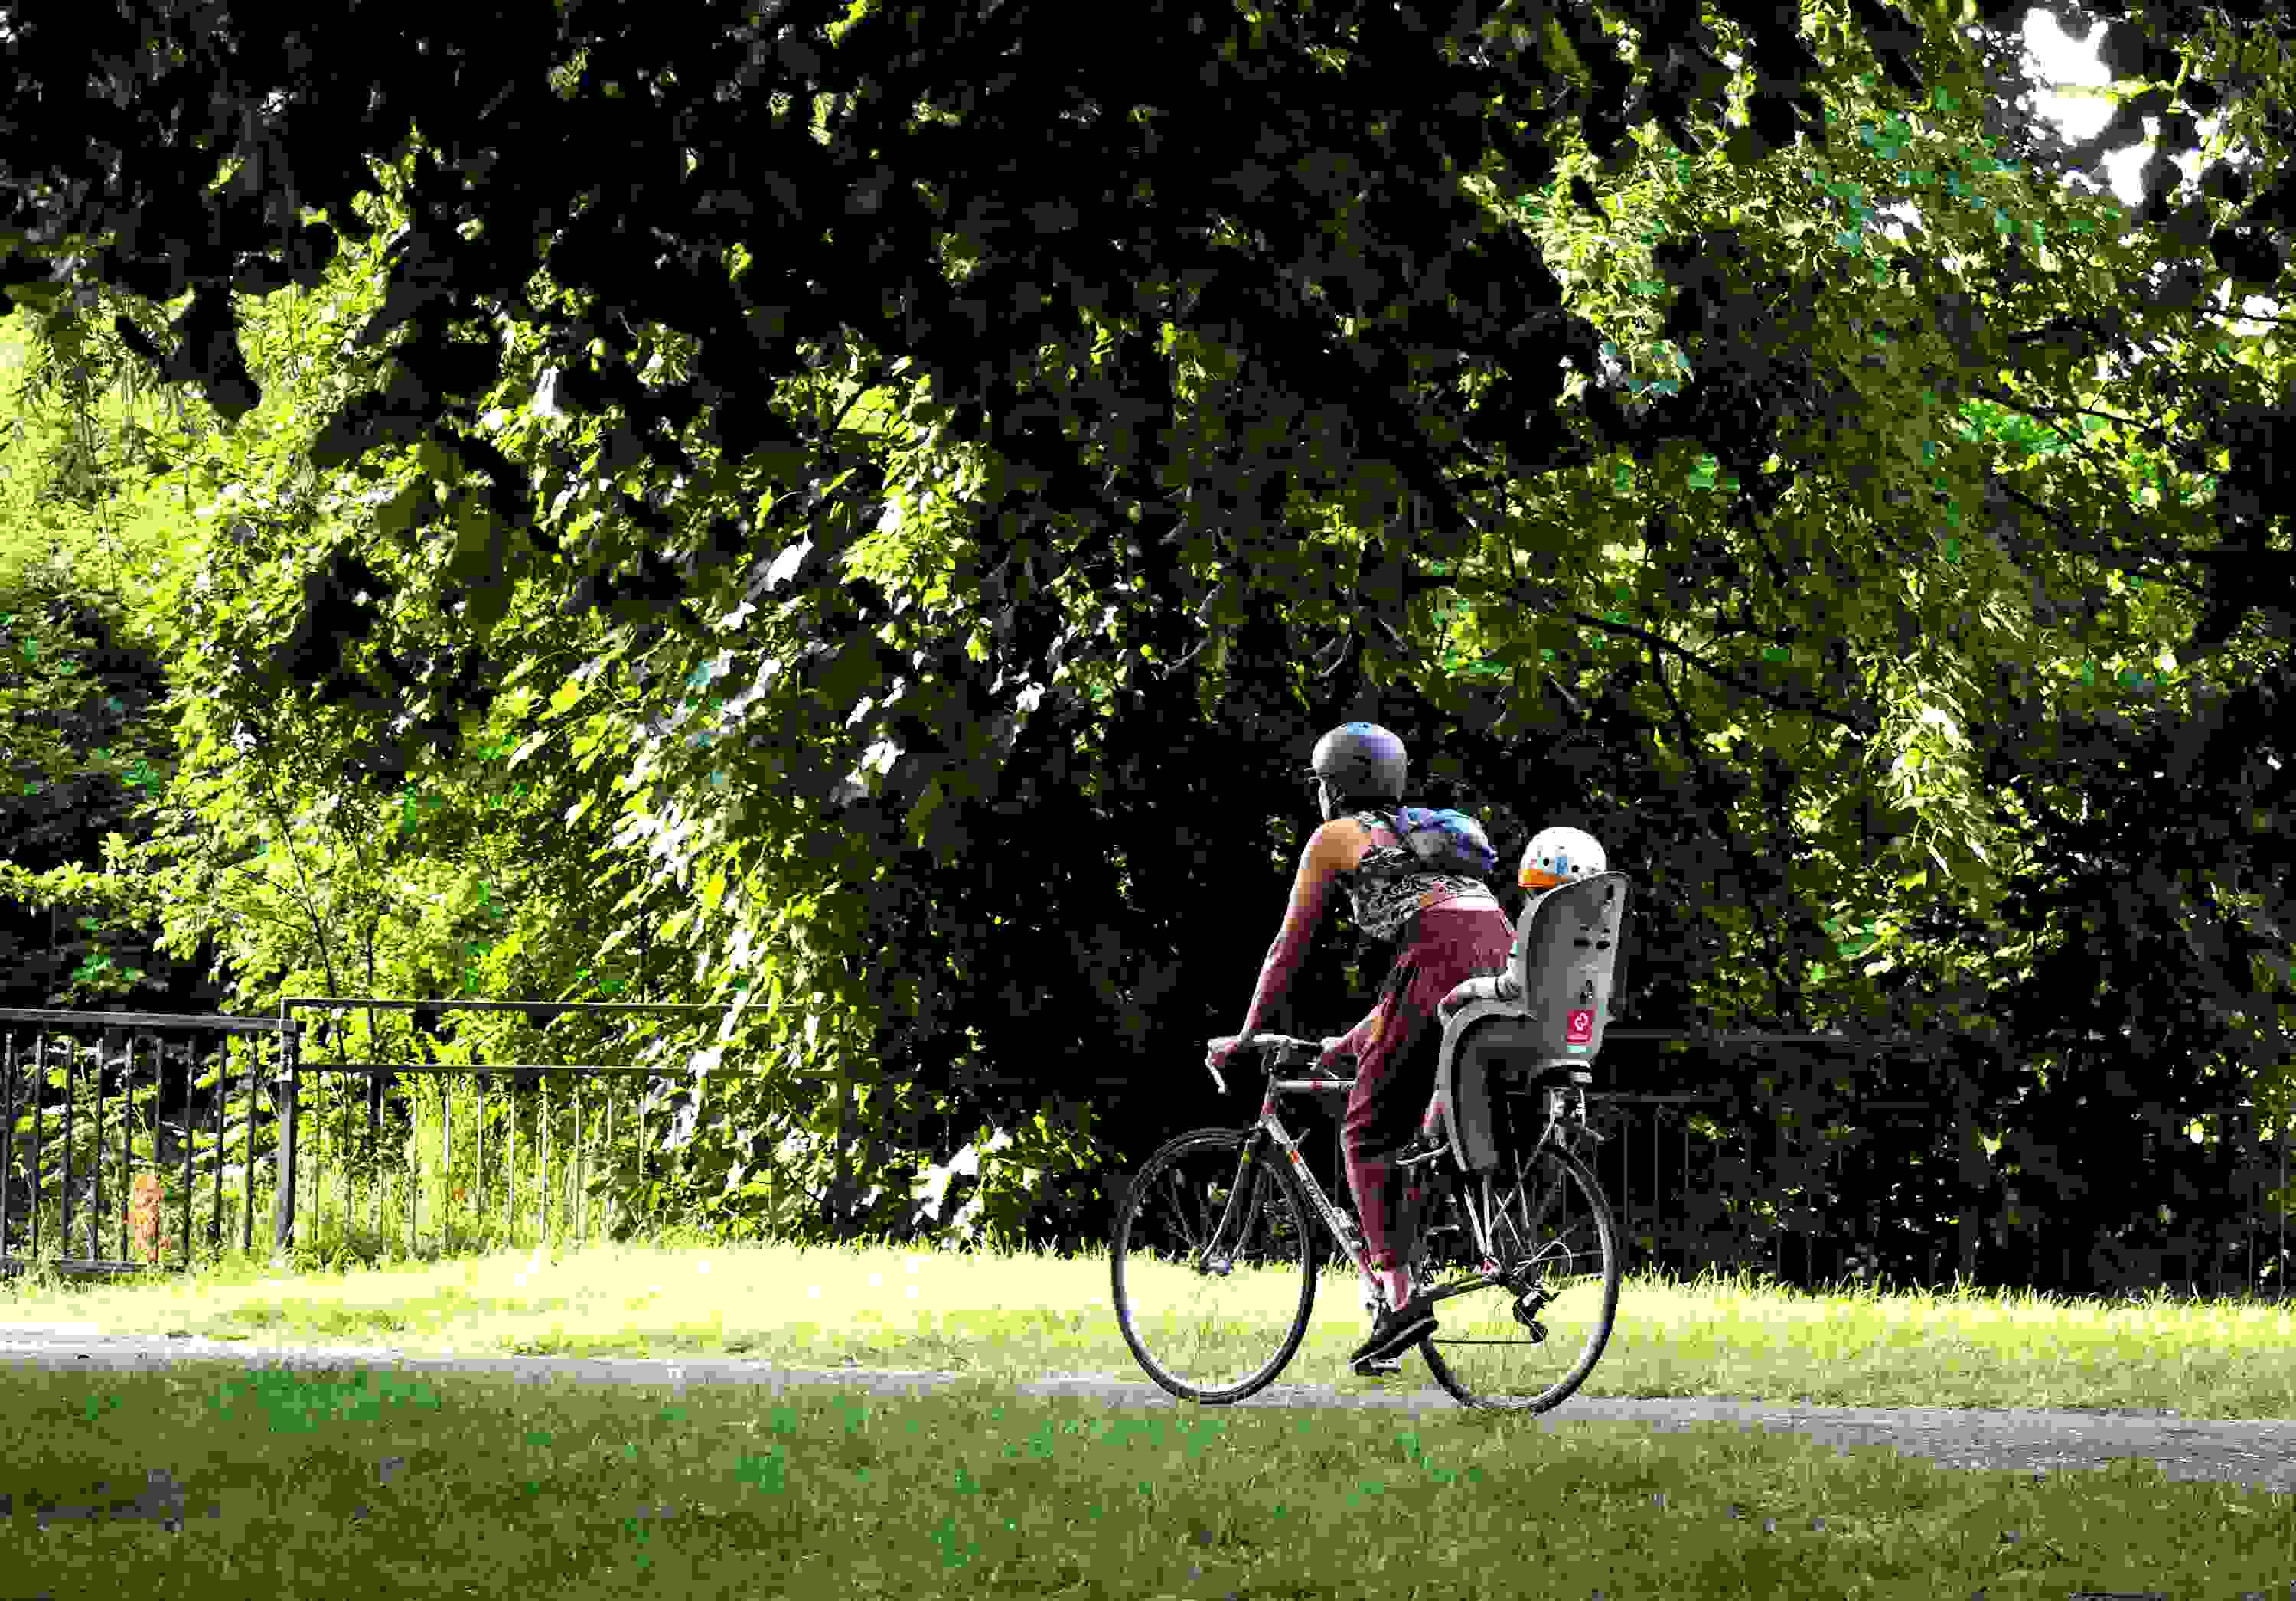 A mother and child cycle through a park